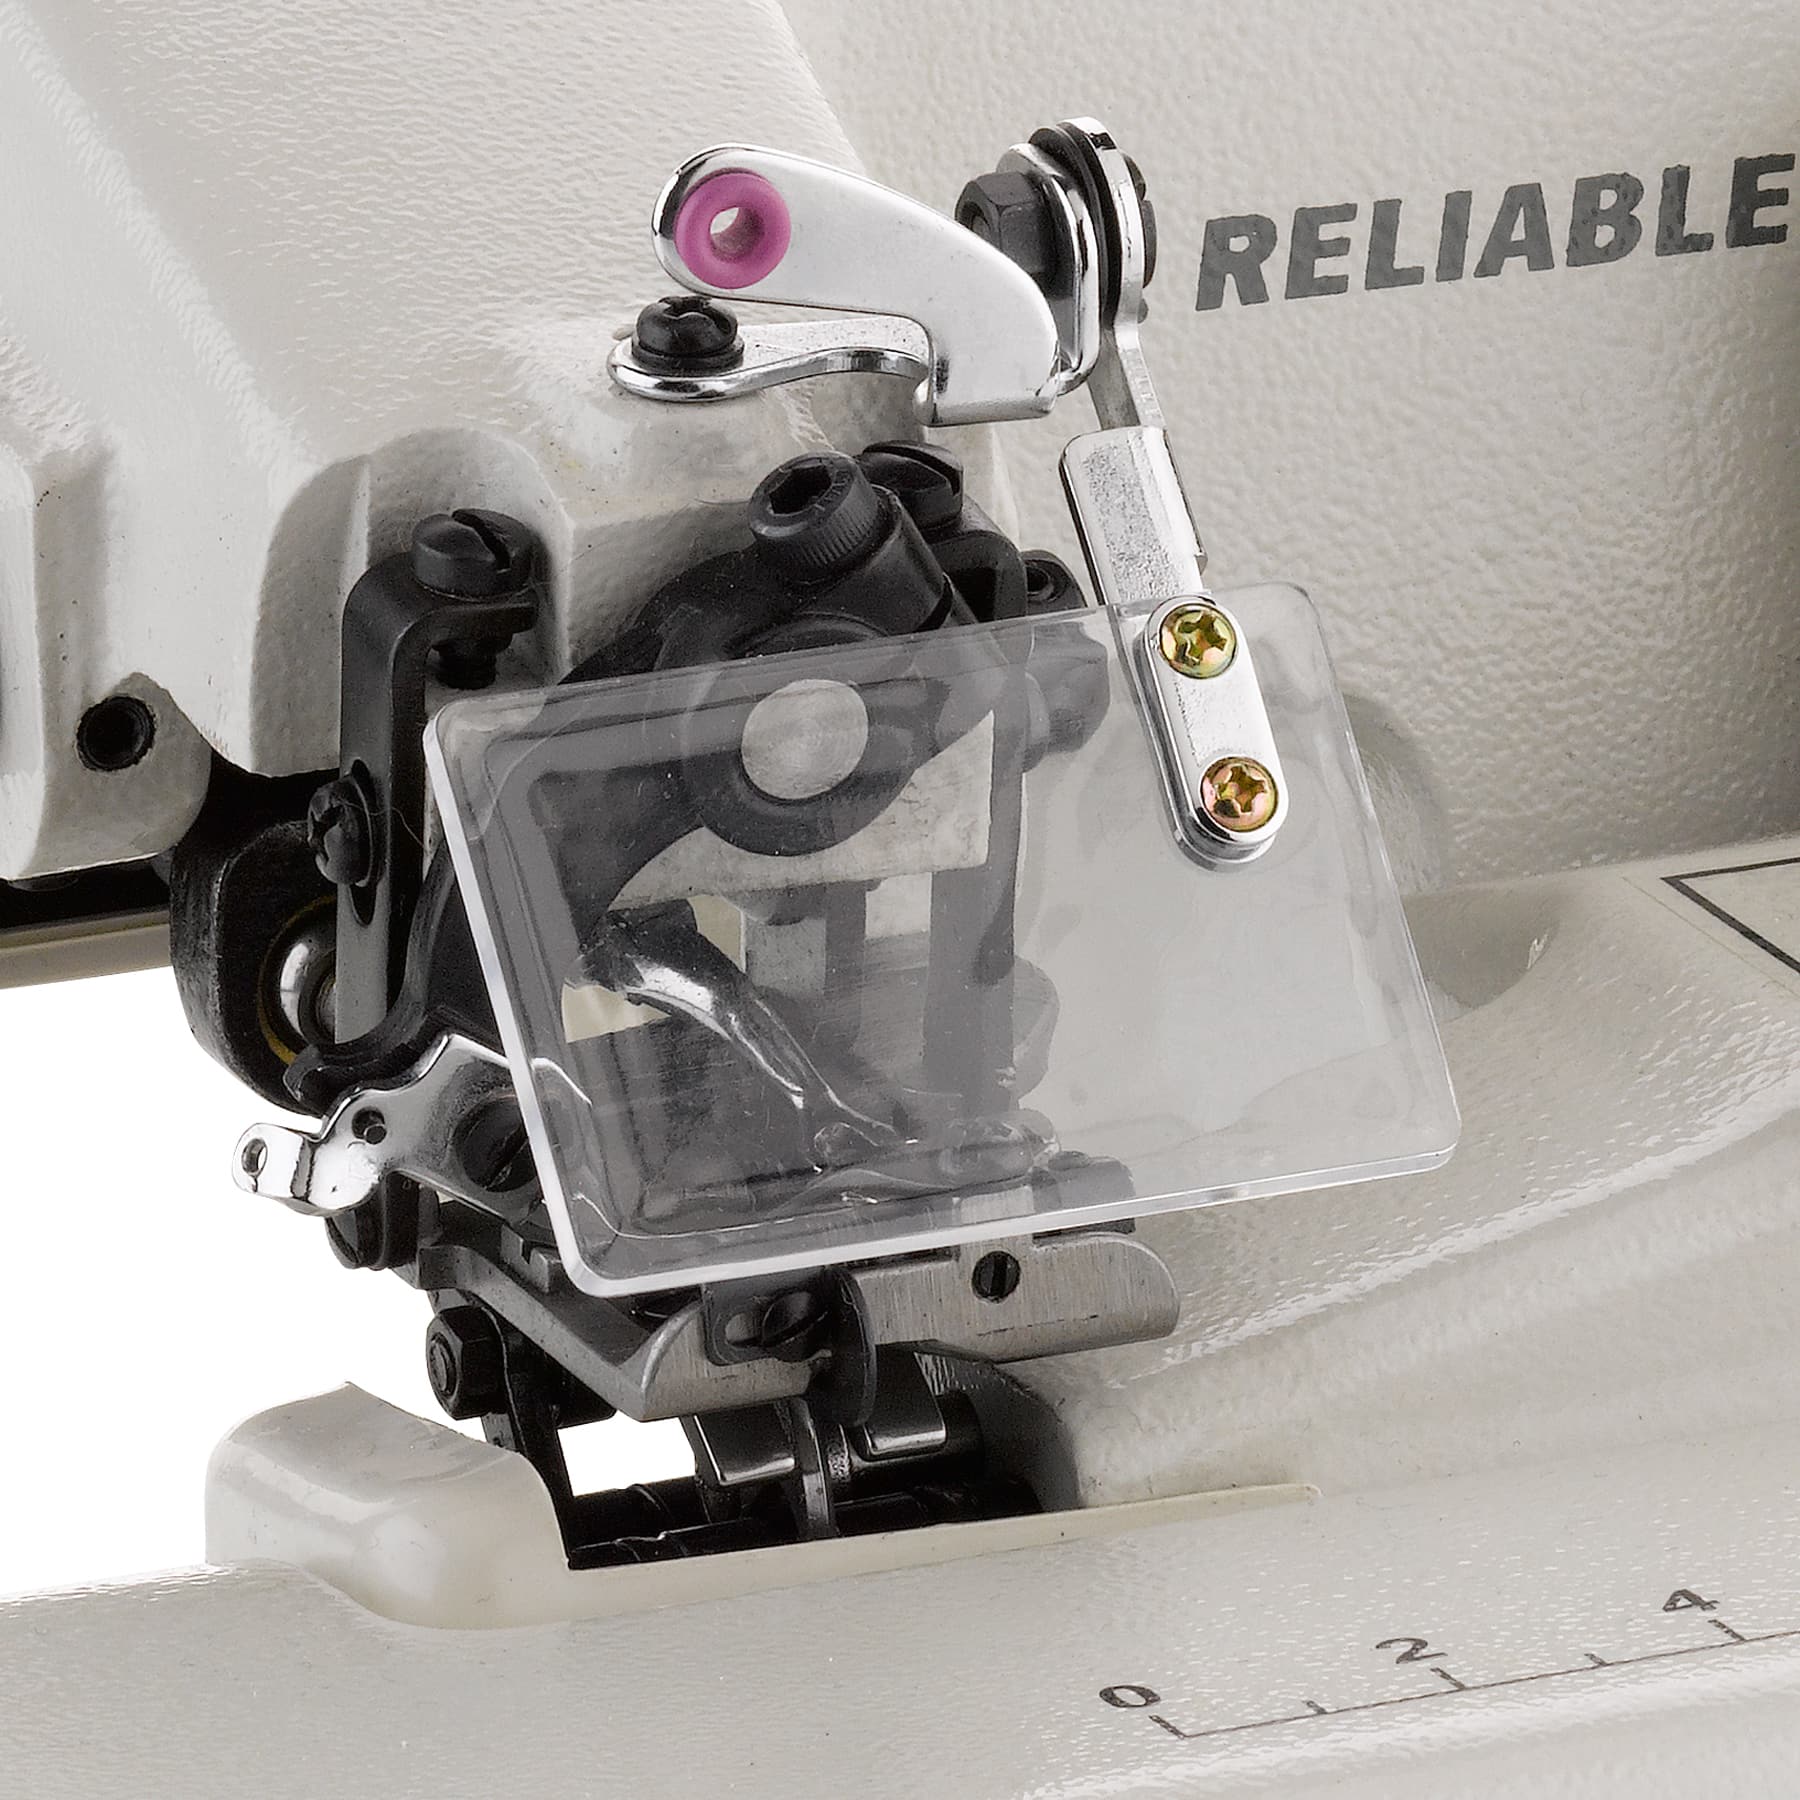 Maestro 600SB Portable Blindstitch Sewing Machine for Hemming